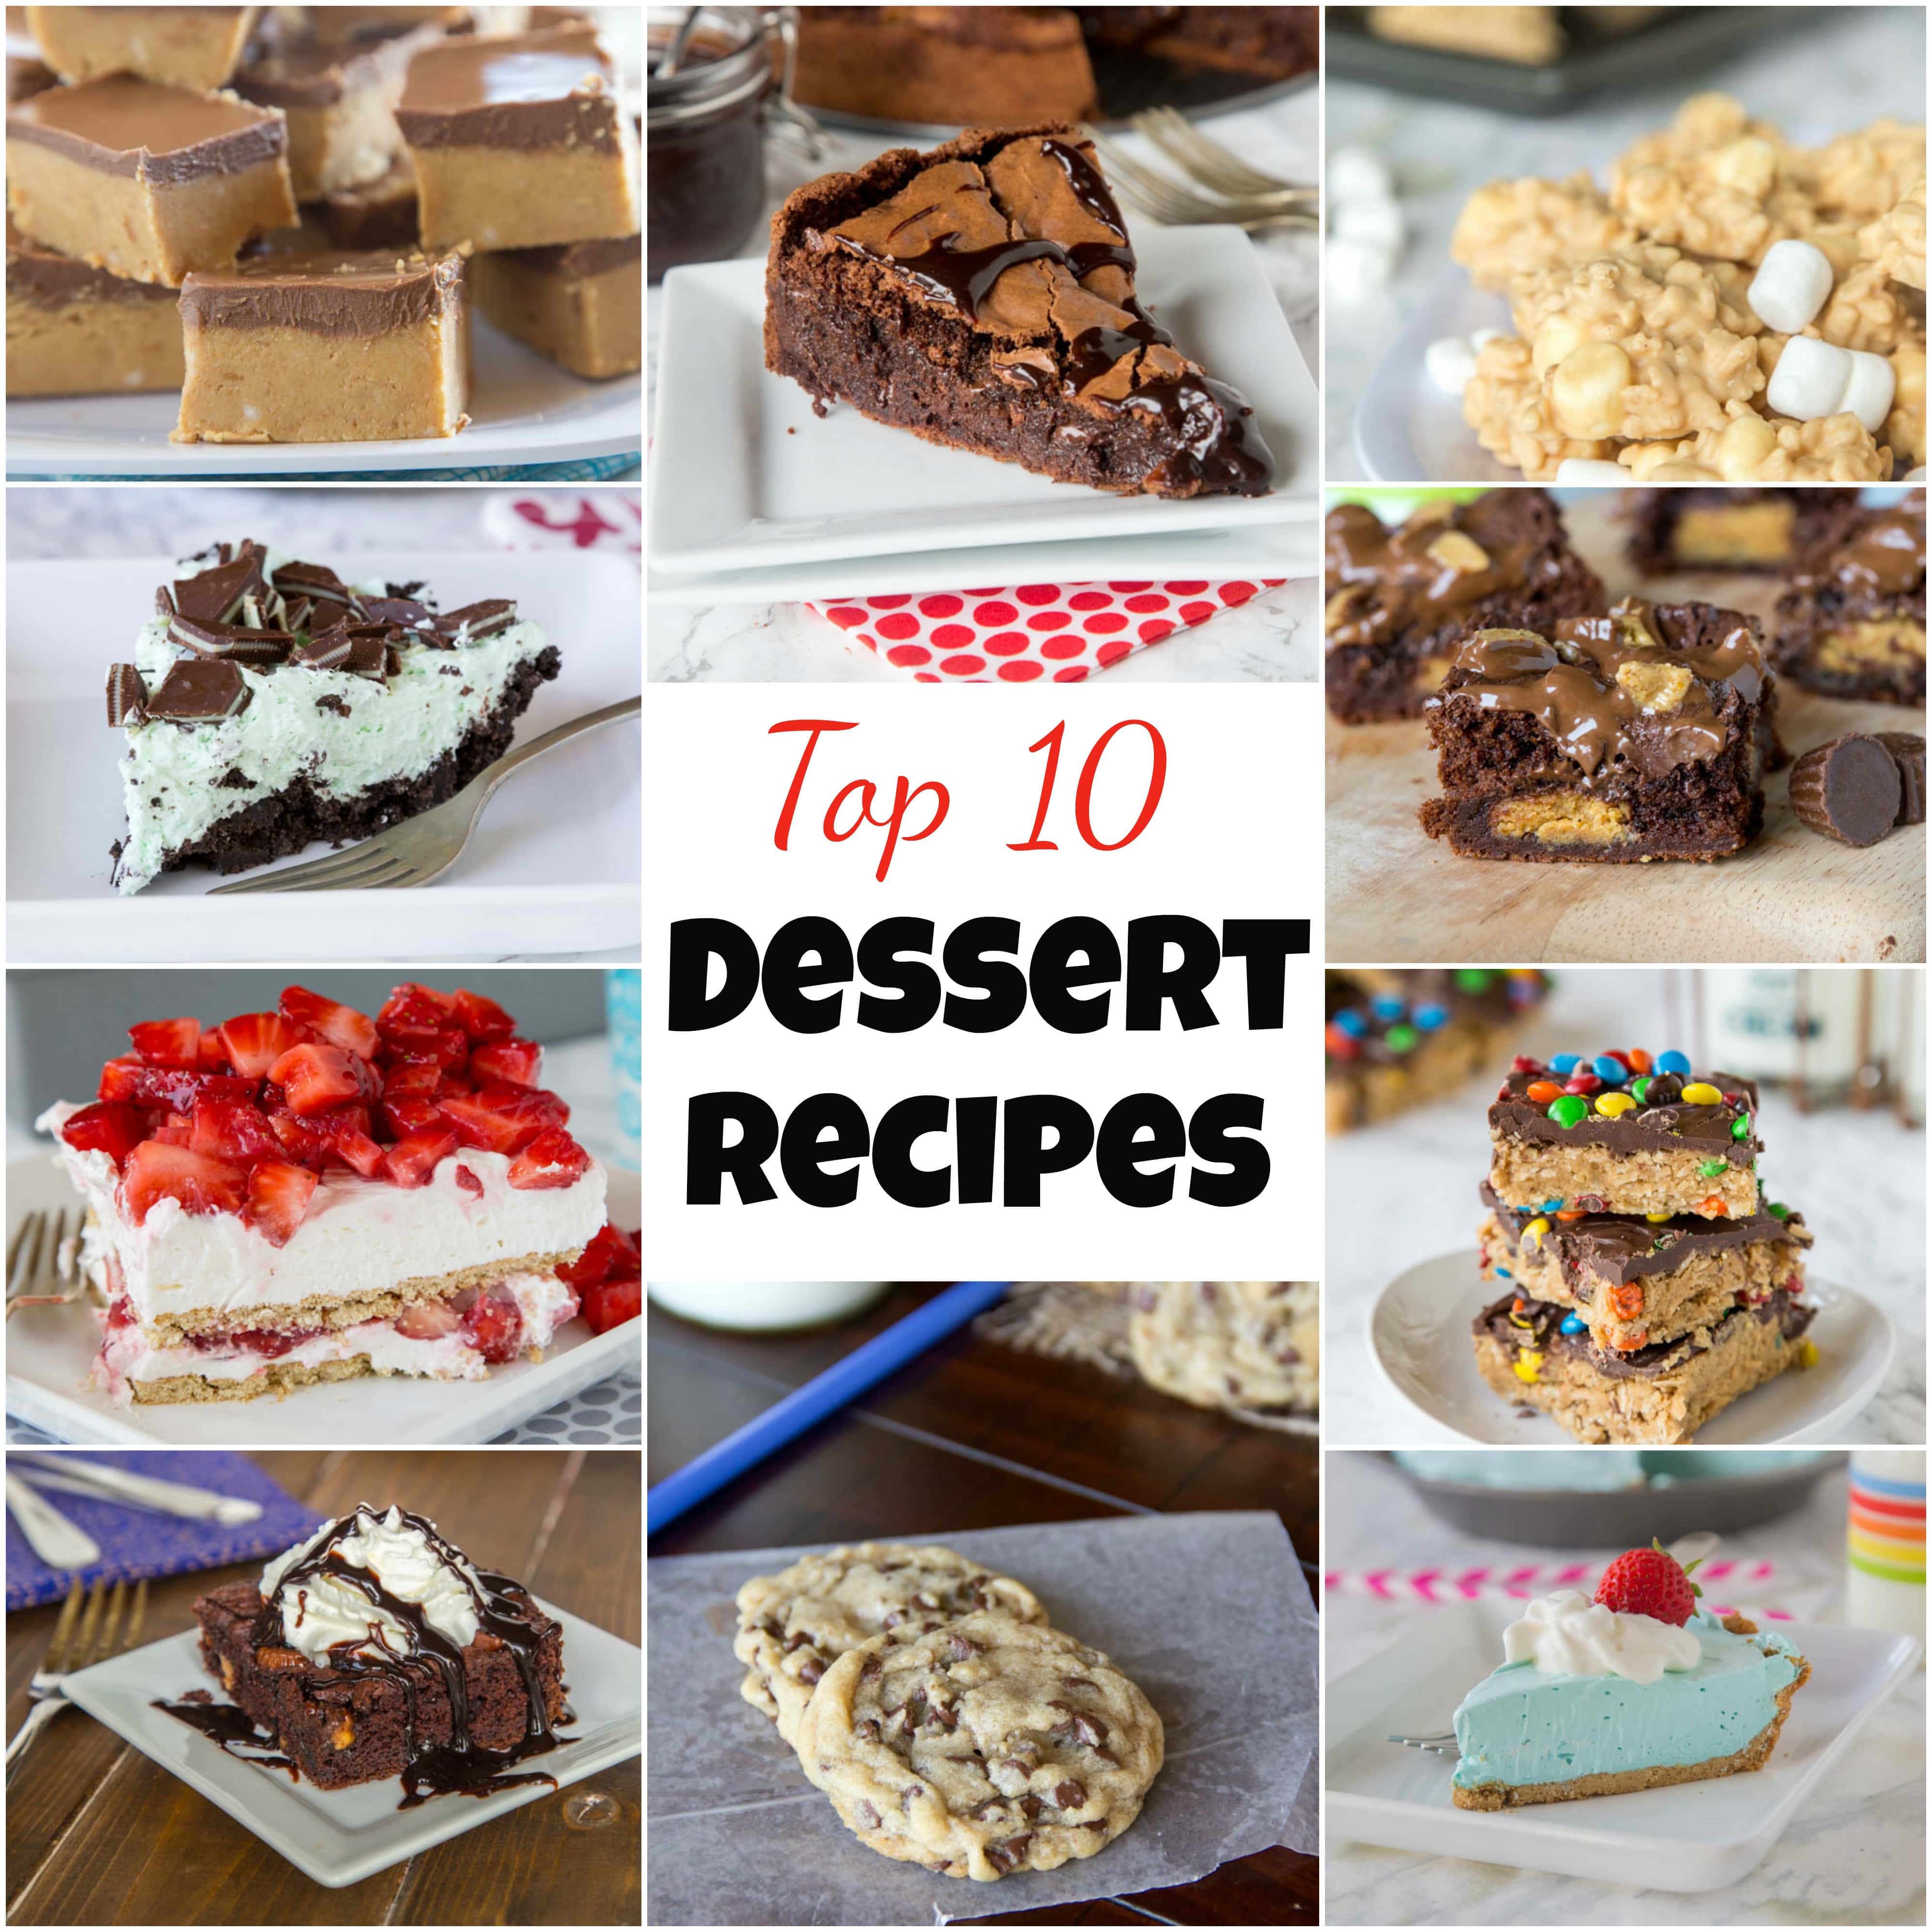 Top 10 Dessert Recipes - Dinners, Dishes, and Desserts